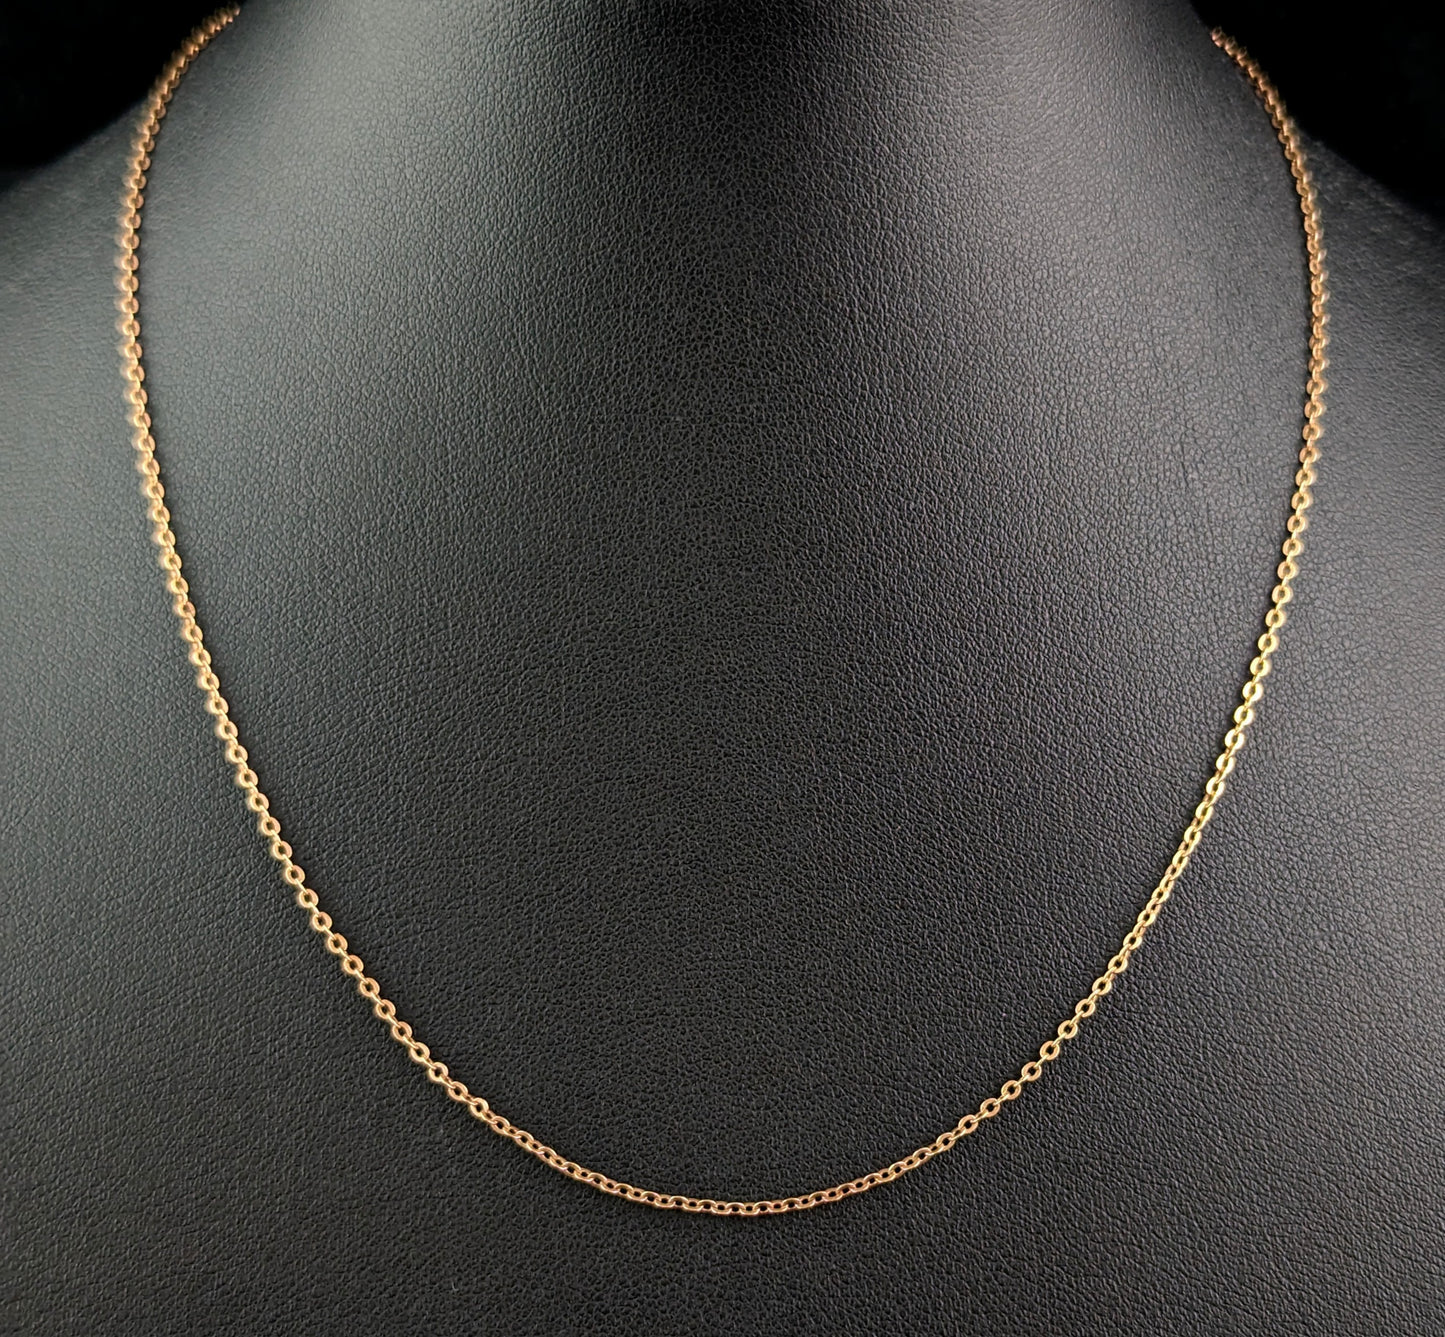 Antique 9ct yellow gold trace link chain necklace, Edwardian